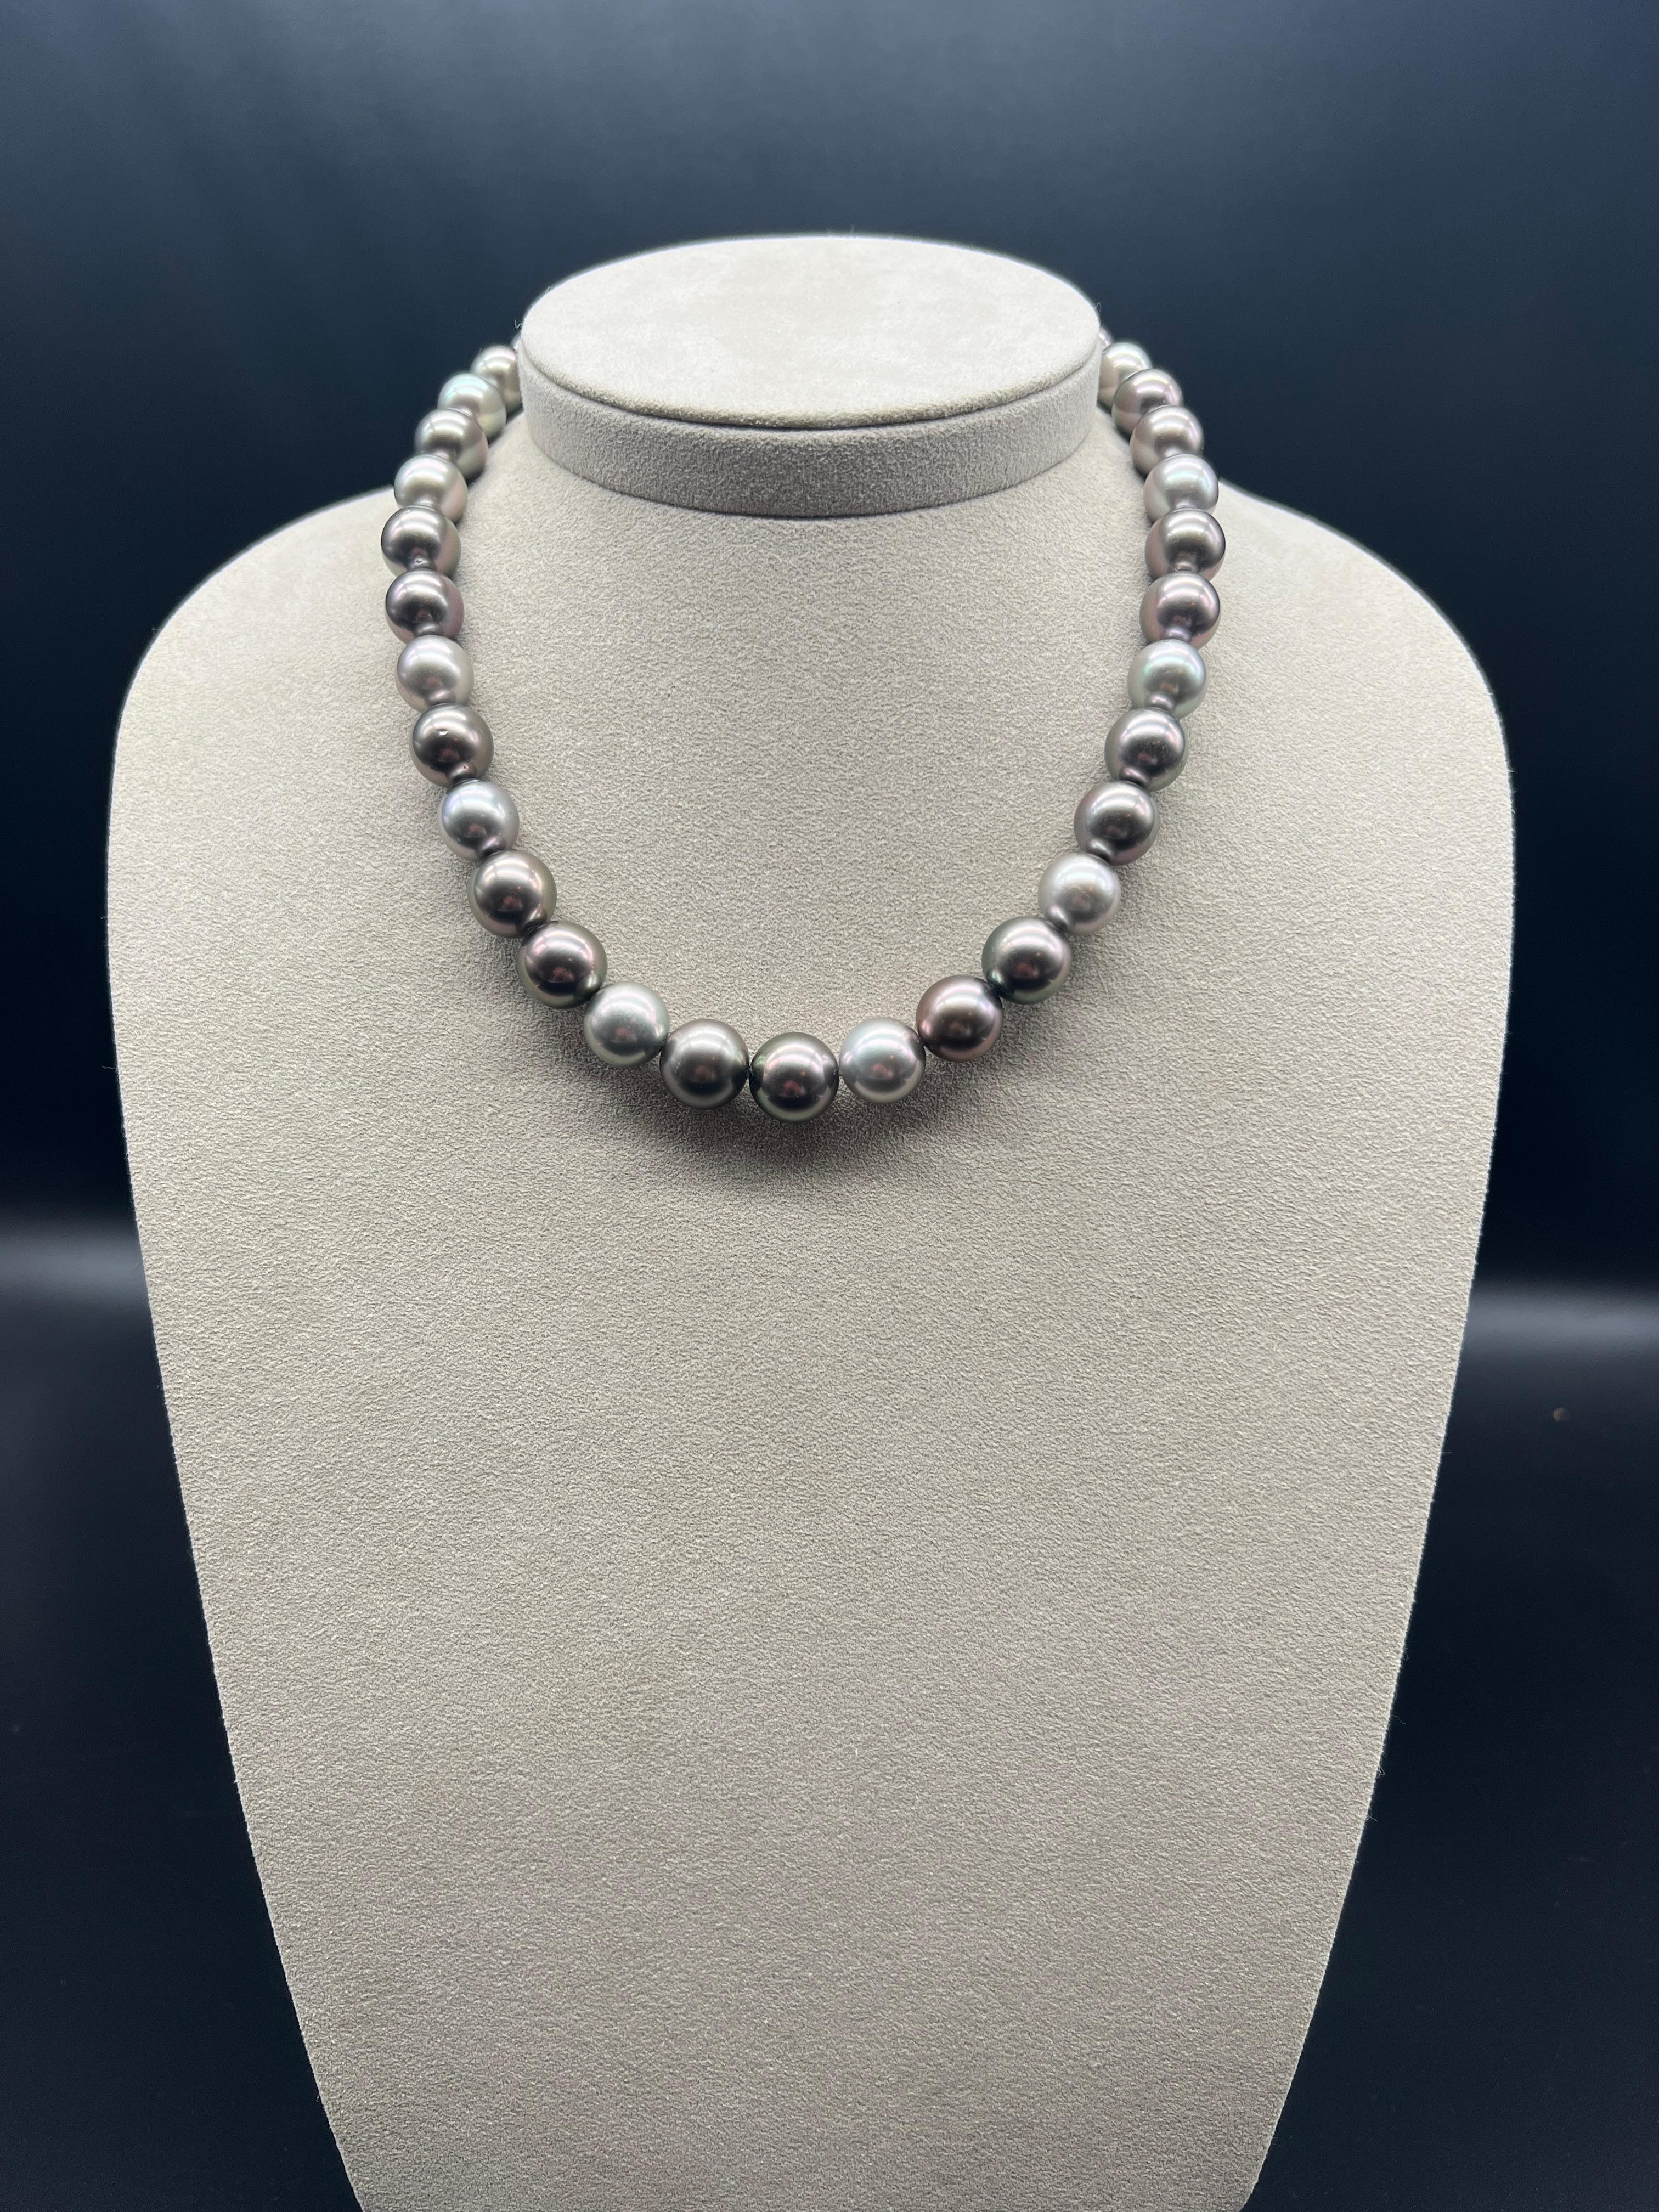 Discover the magnificent Tahitian cultured pearl necklace, an exceptional piece of jewelry that embodies elegance and exotic beauty. Composed of 37 Tahitian cultured pearls, this necklace will seduce you with its sophistication and refinement.

Each